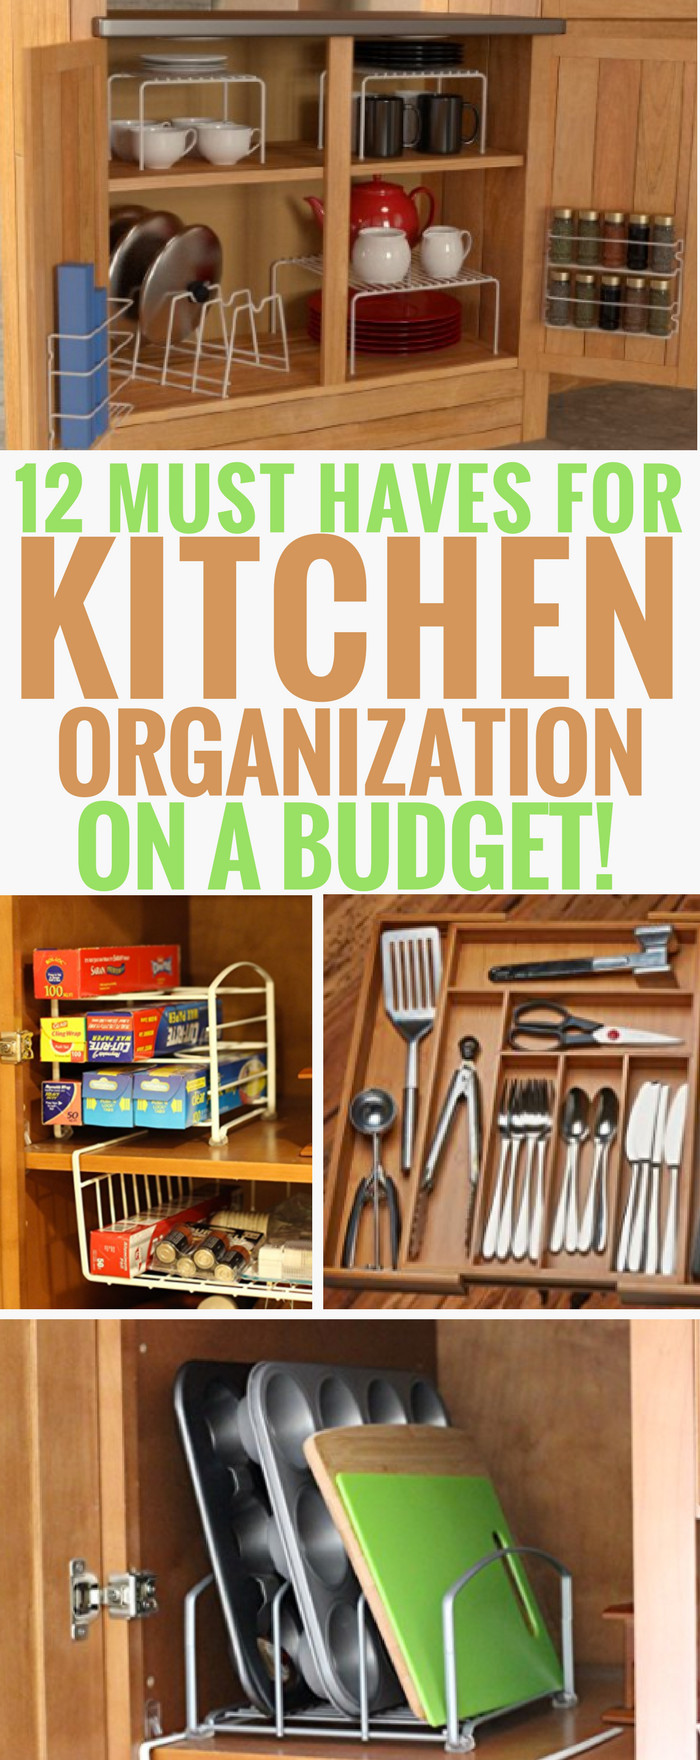 Kitchen Organizer Products
 12 Must Have Products for Kitchen Organization A Bud